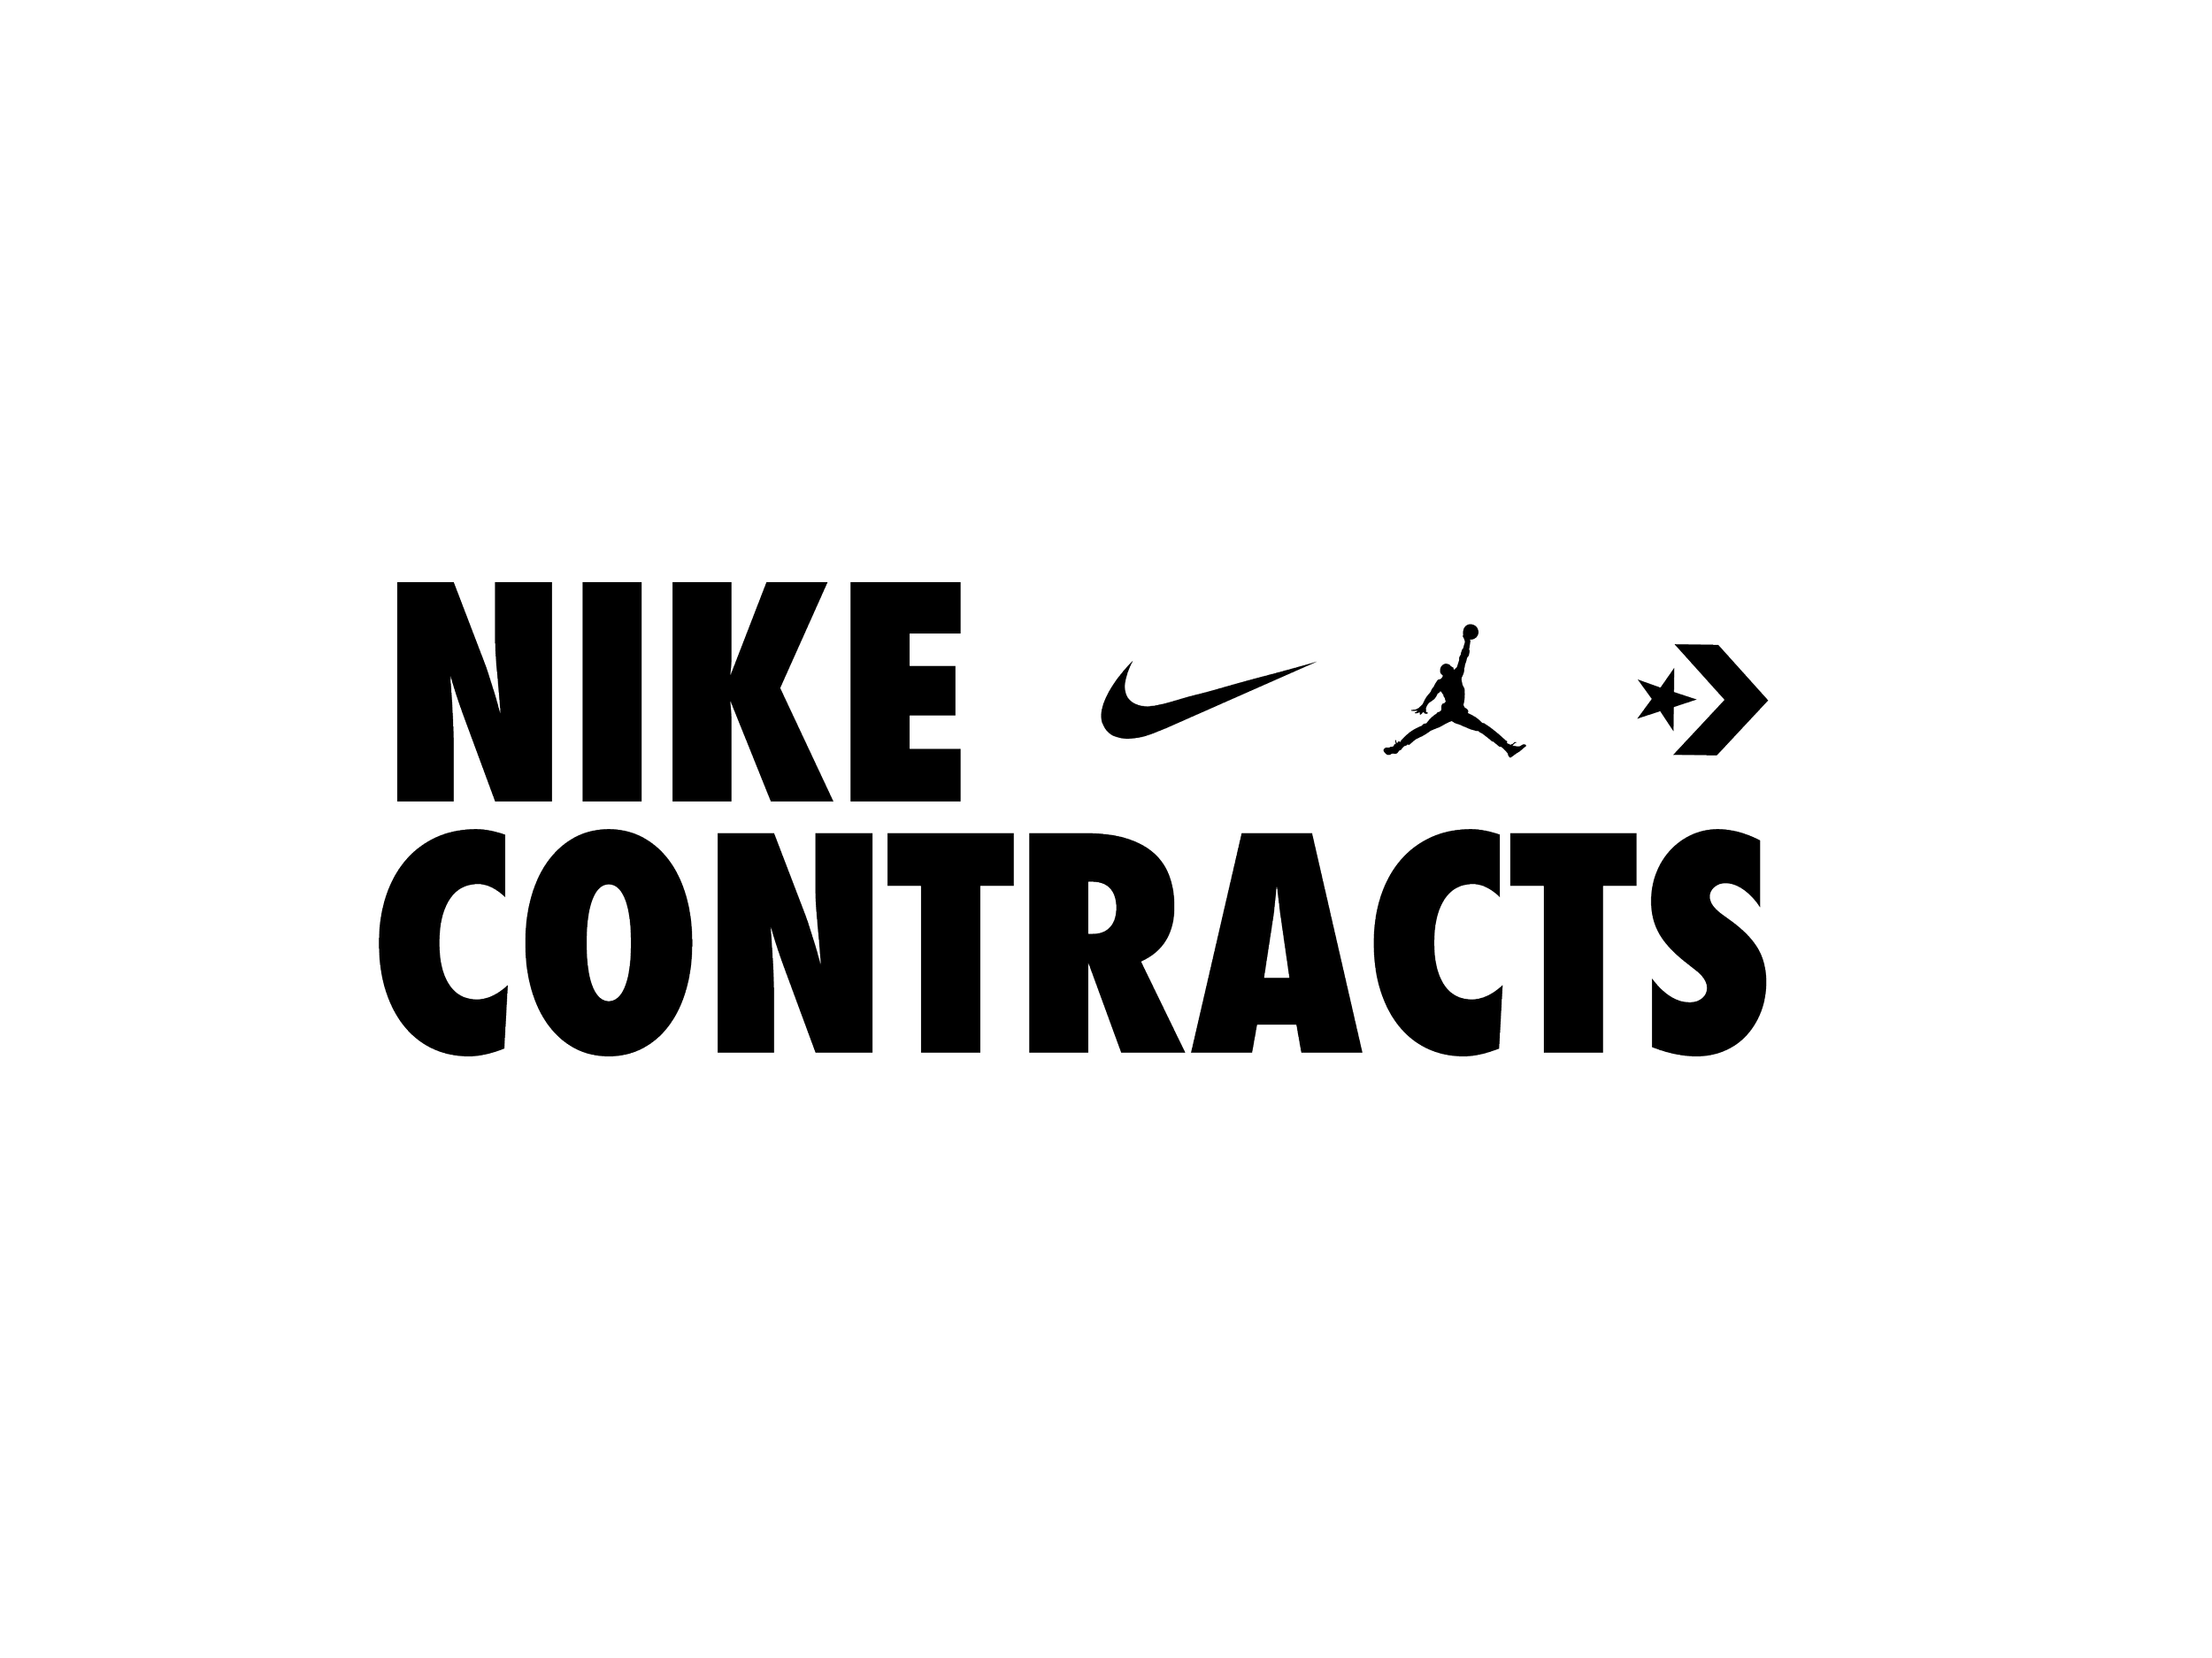 NIKEContracts_WordMark_r1-06.png